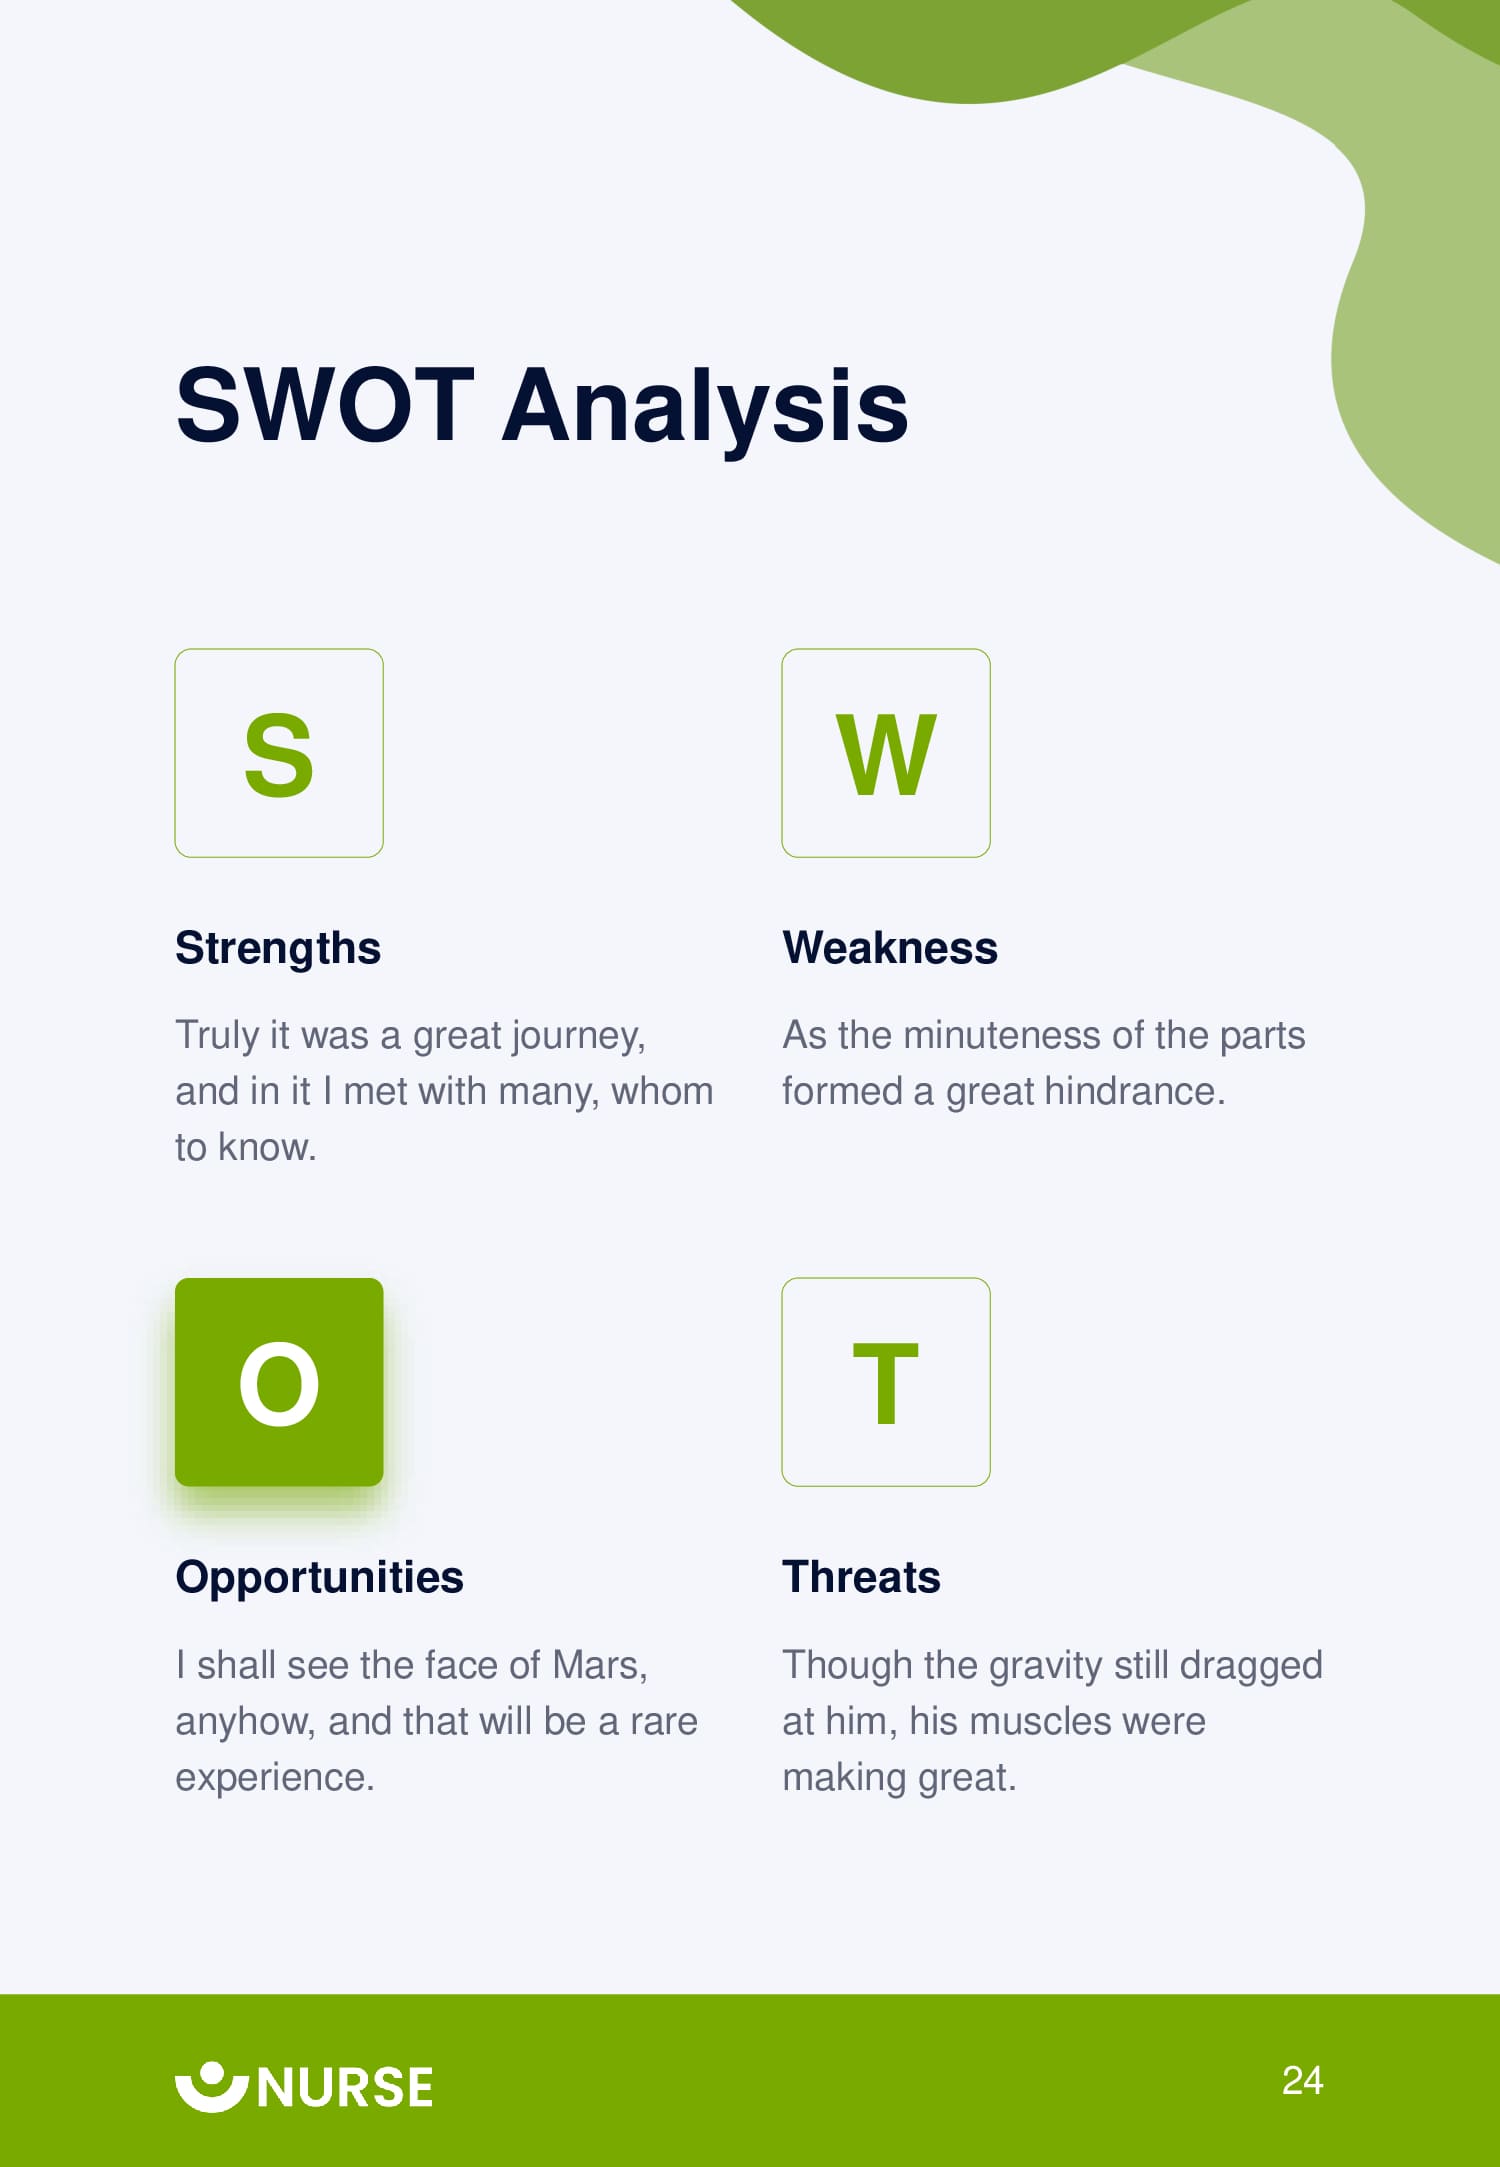 SWOT analysis to identify the strengths and weaknesses of medical personnel.